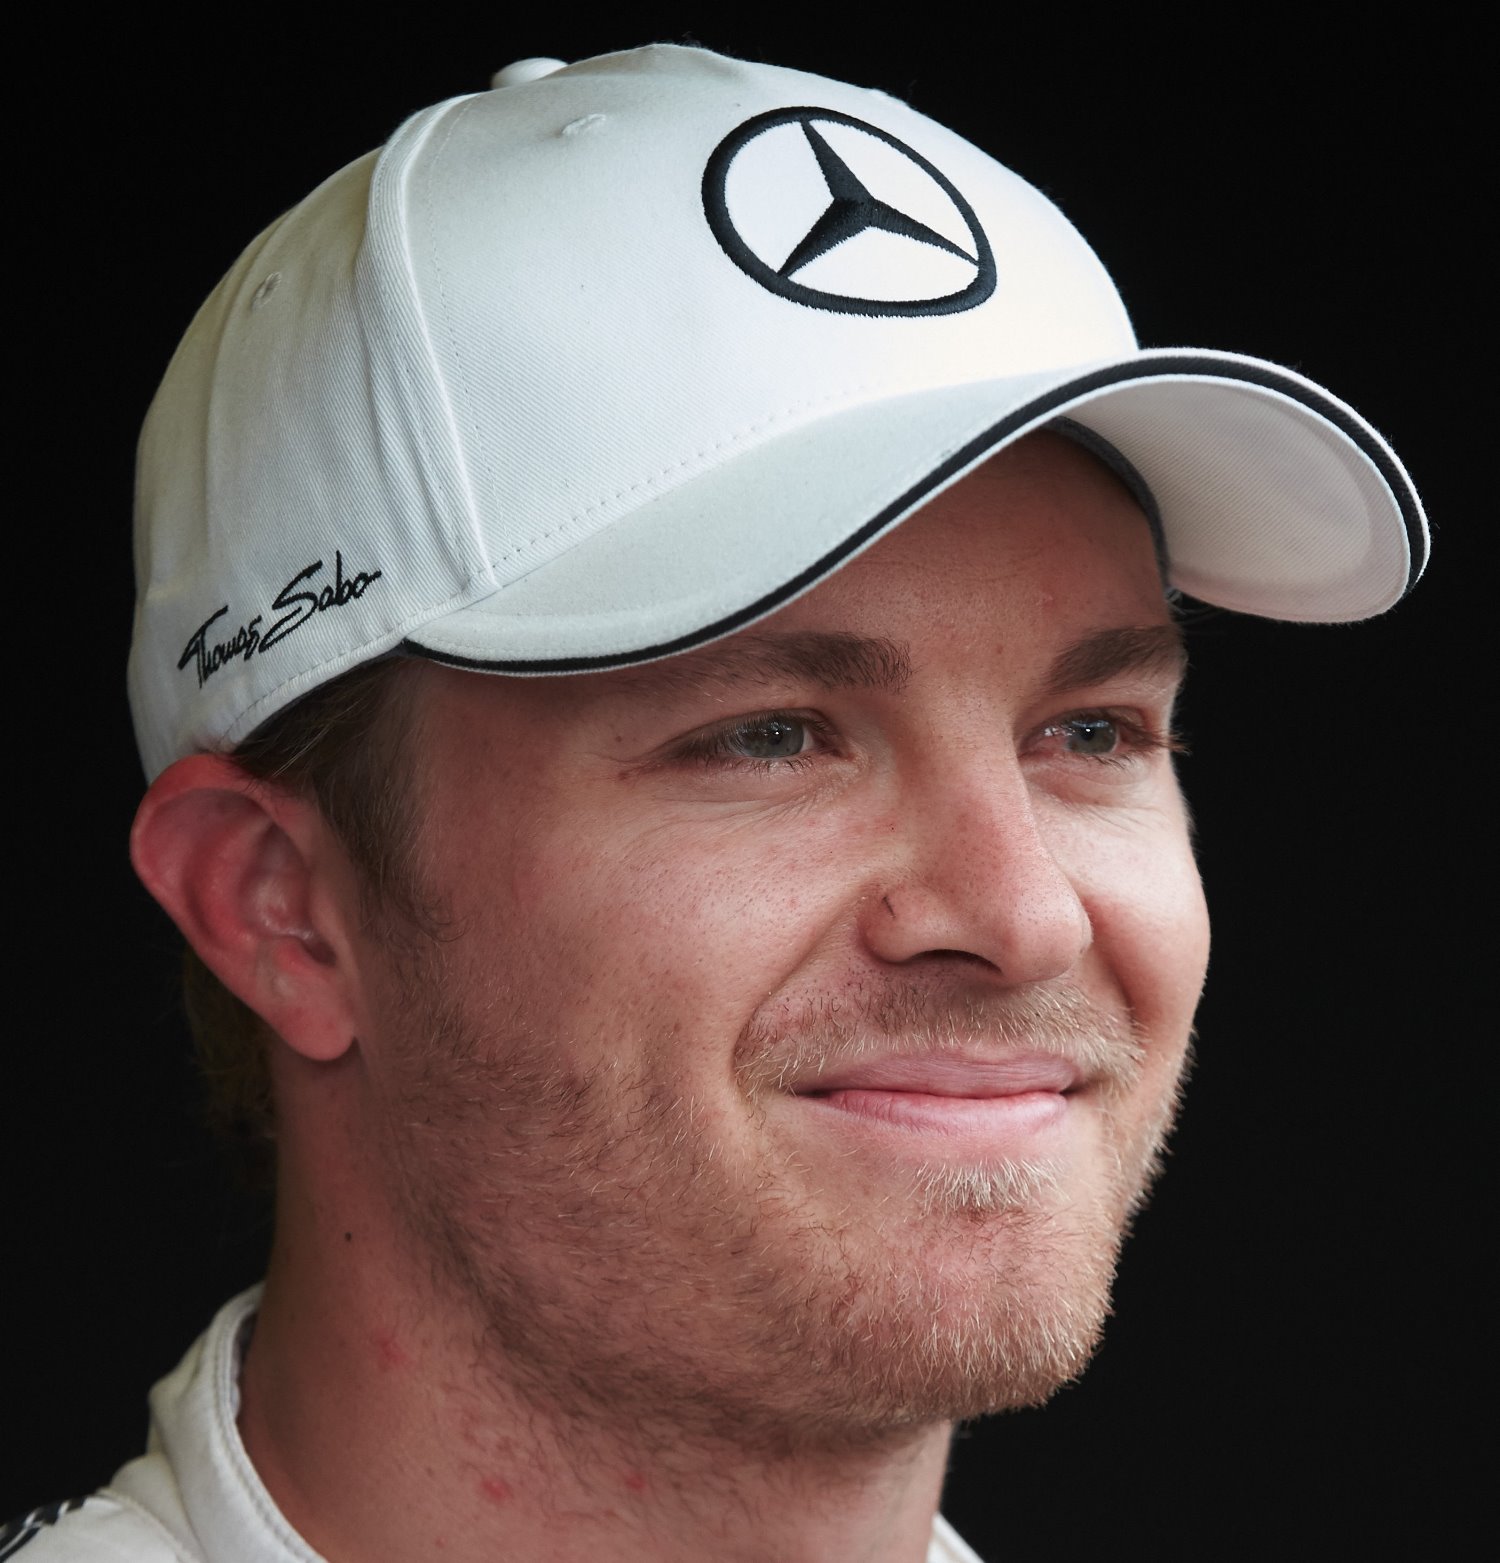 With his 100 HP advantage, Rosberg knows he can dust Vettel